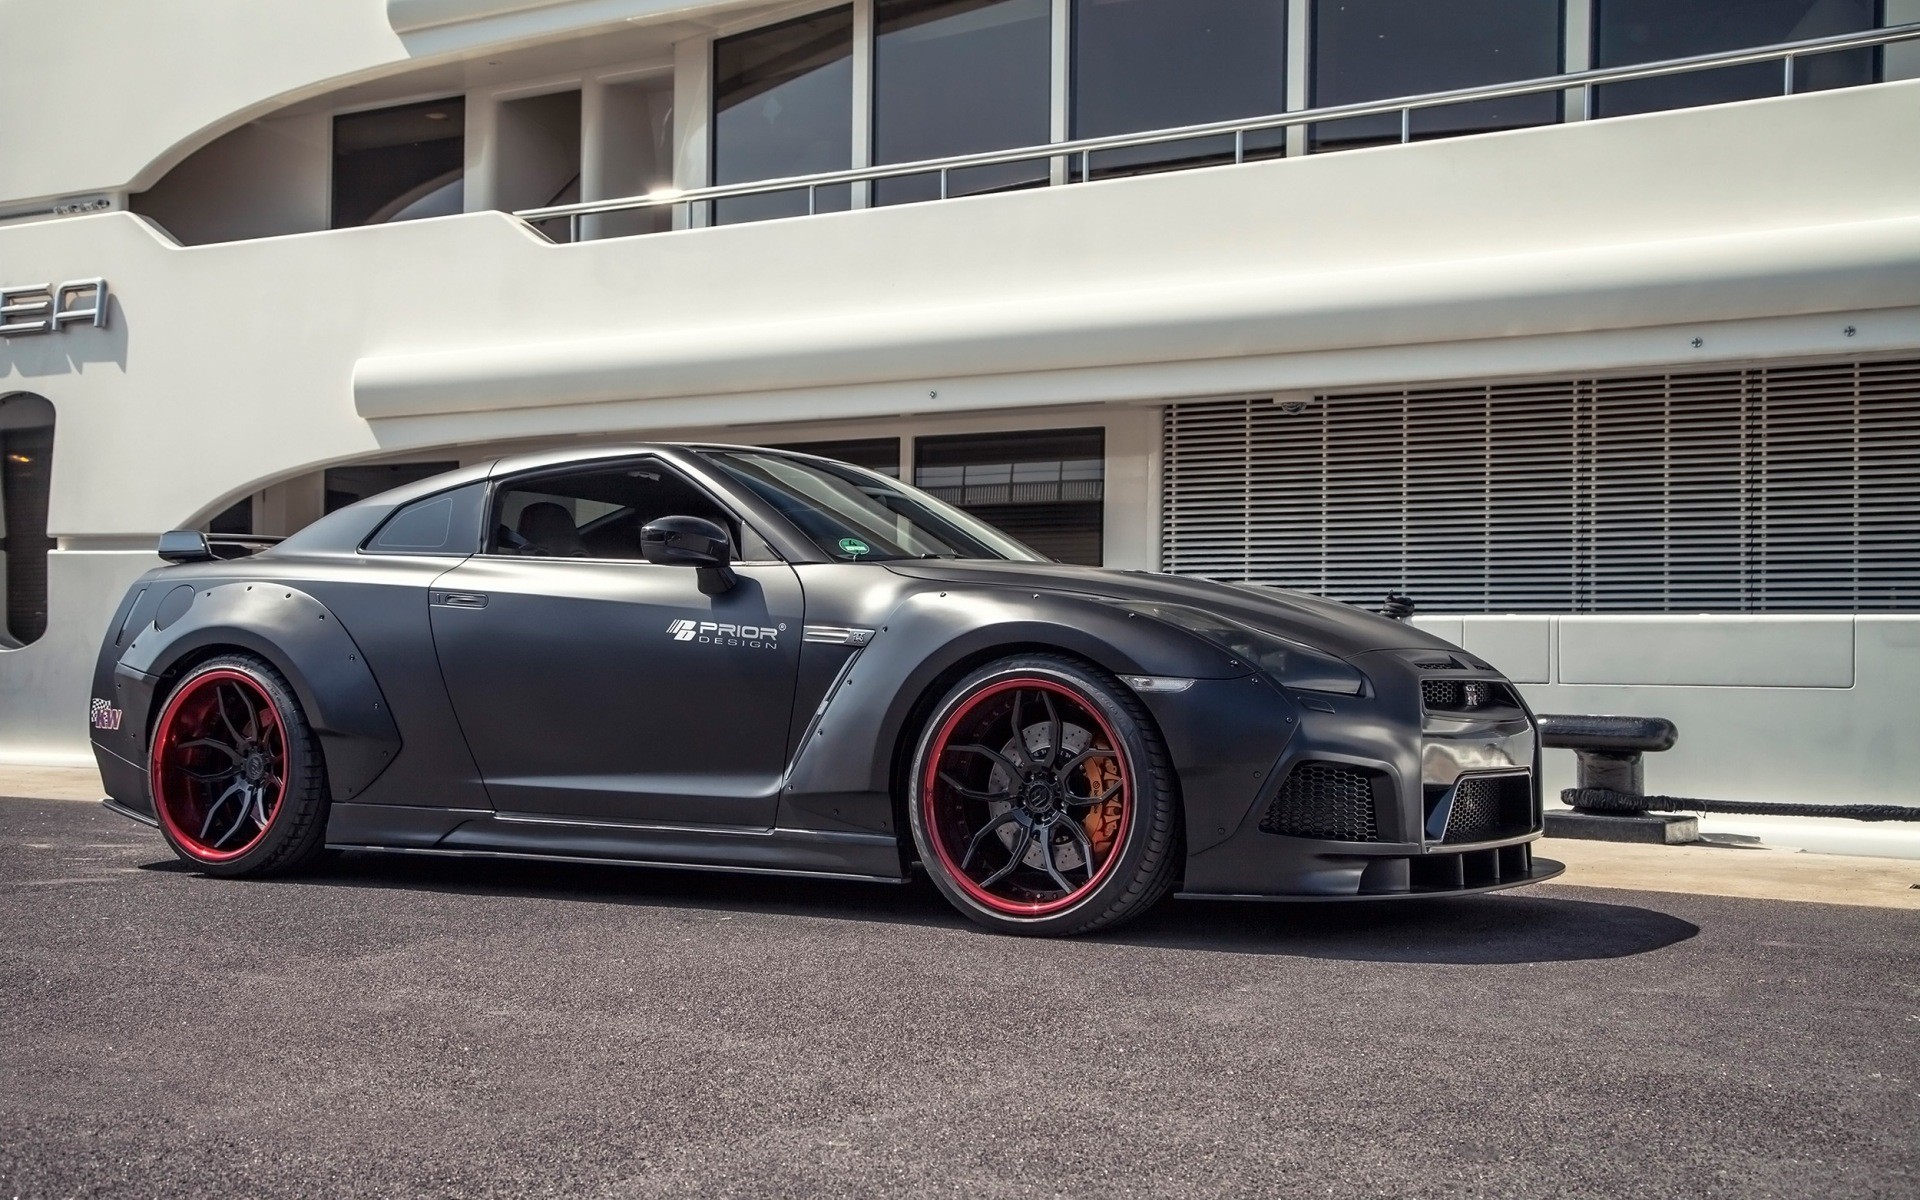 Prior Design Nissan Nissan GT R R35 Nissan GT R PD750 Widebody Car Vehicle Tuning Colored Wheels 1920x1200